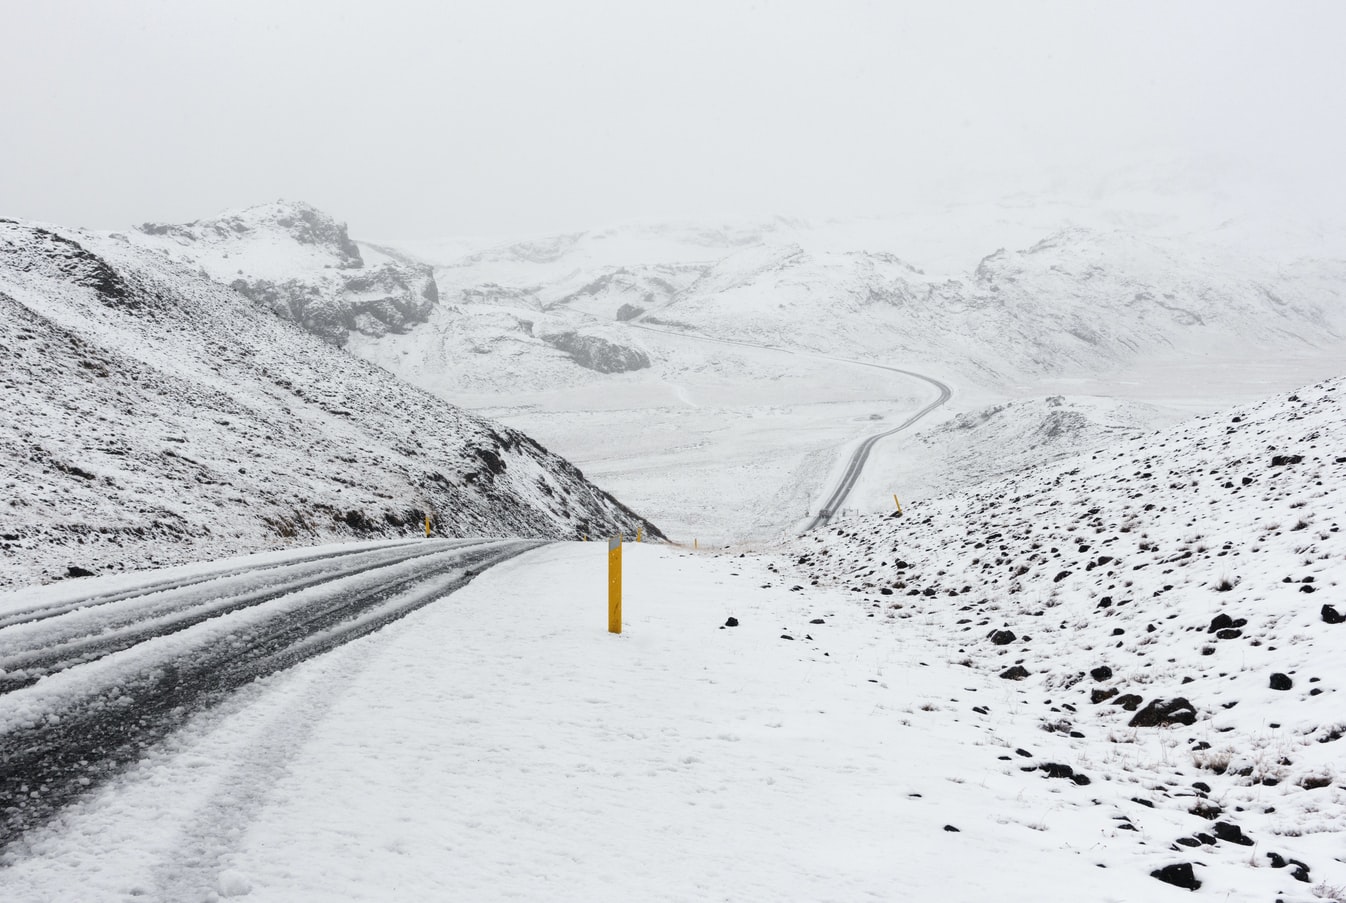 Preparation for Iceland’s road conditions is key during a winter trip